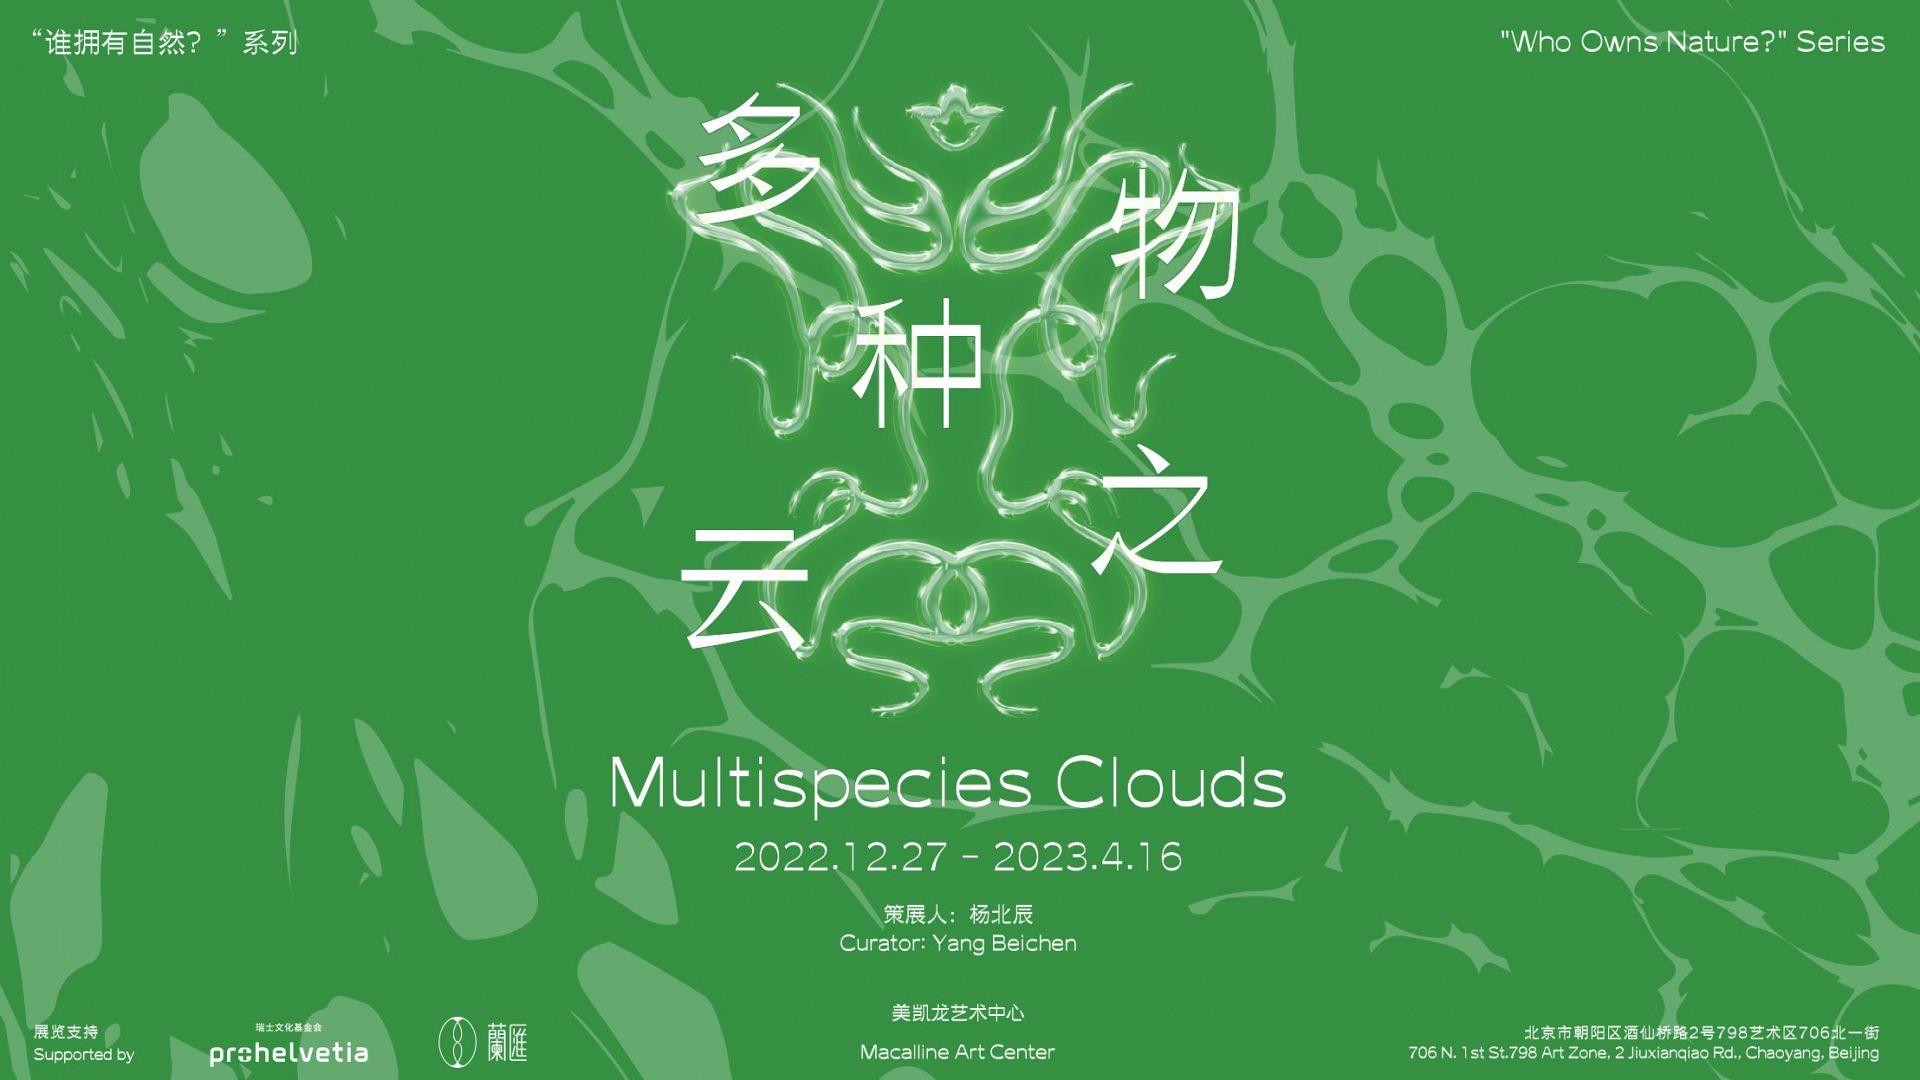 Trevor Yeung participates in group exhibition Multispecies Clouds at Macalline Art Center, Beijing